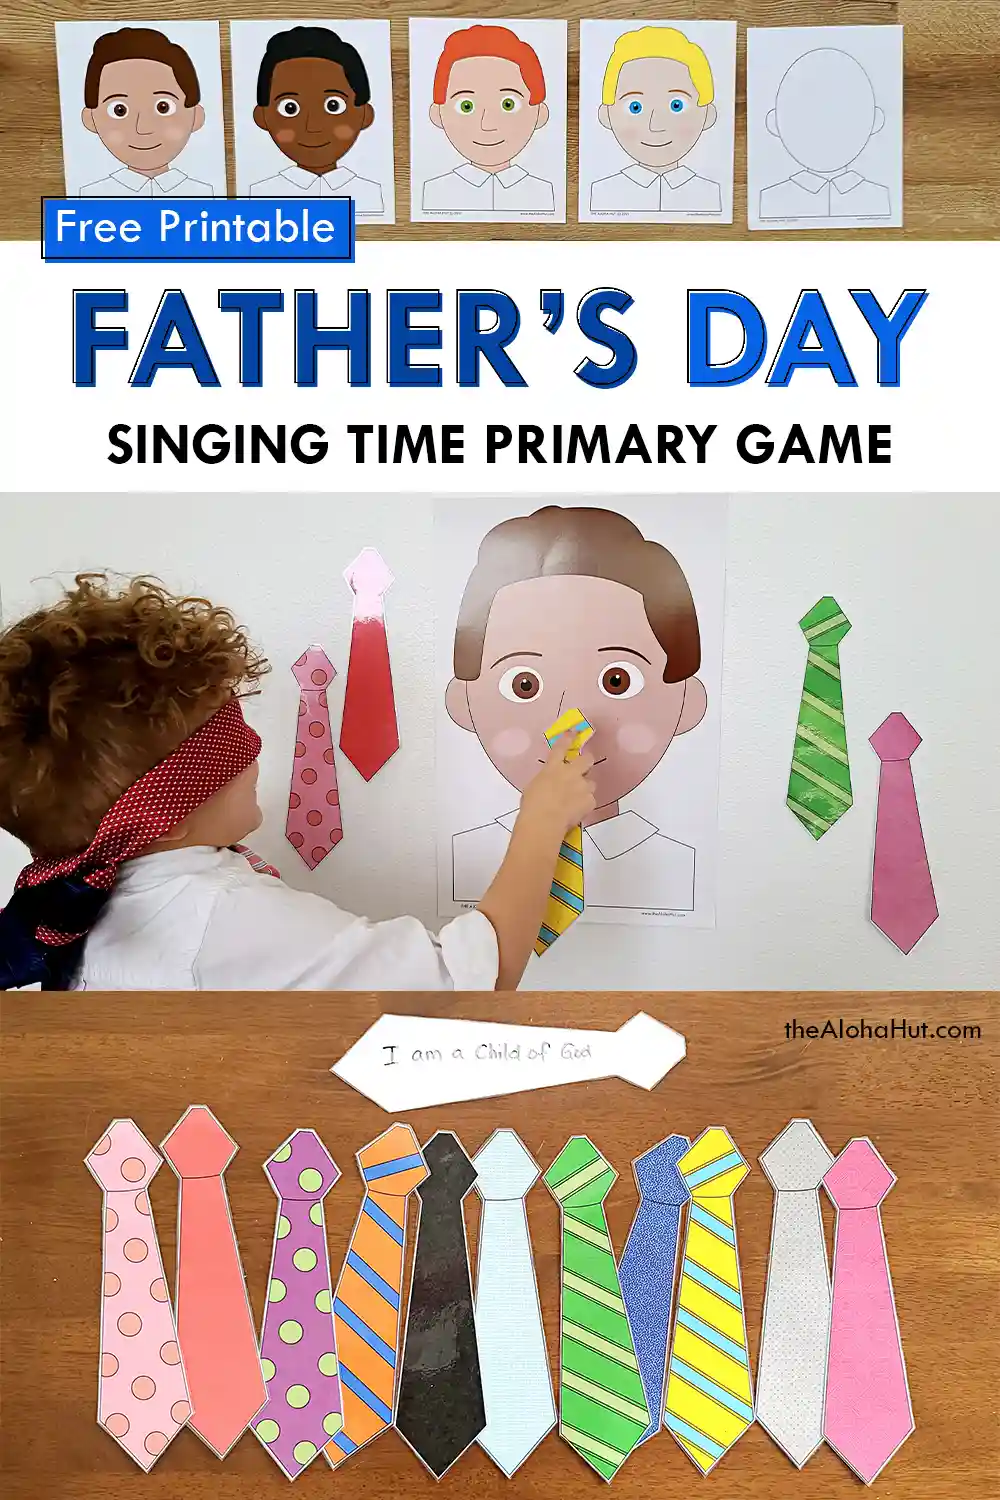 Pin the tie on dad Father's Day game and activity. Perfect activity for primary singing time at church or for the kids to play with dad. Print the Father's Day coloring pages and help kids draw a picture of dad or grandpa. Then print the ties and have the kids write messages on the ties. Makes a great Father's Day card and easy Father's Day gift from the kids.